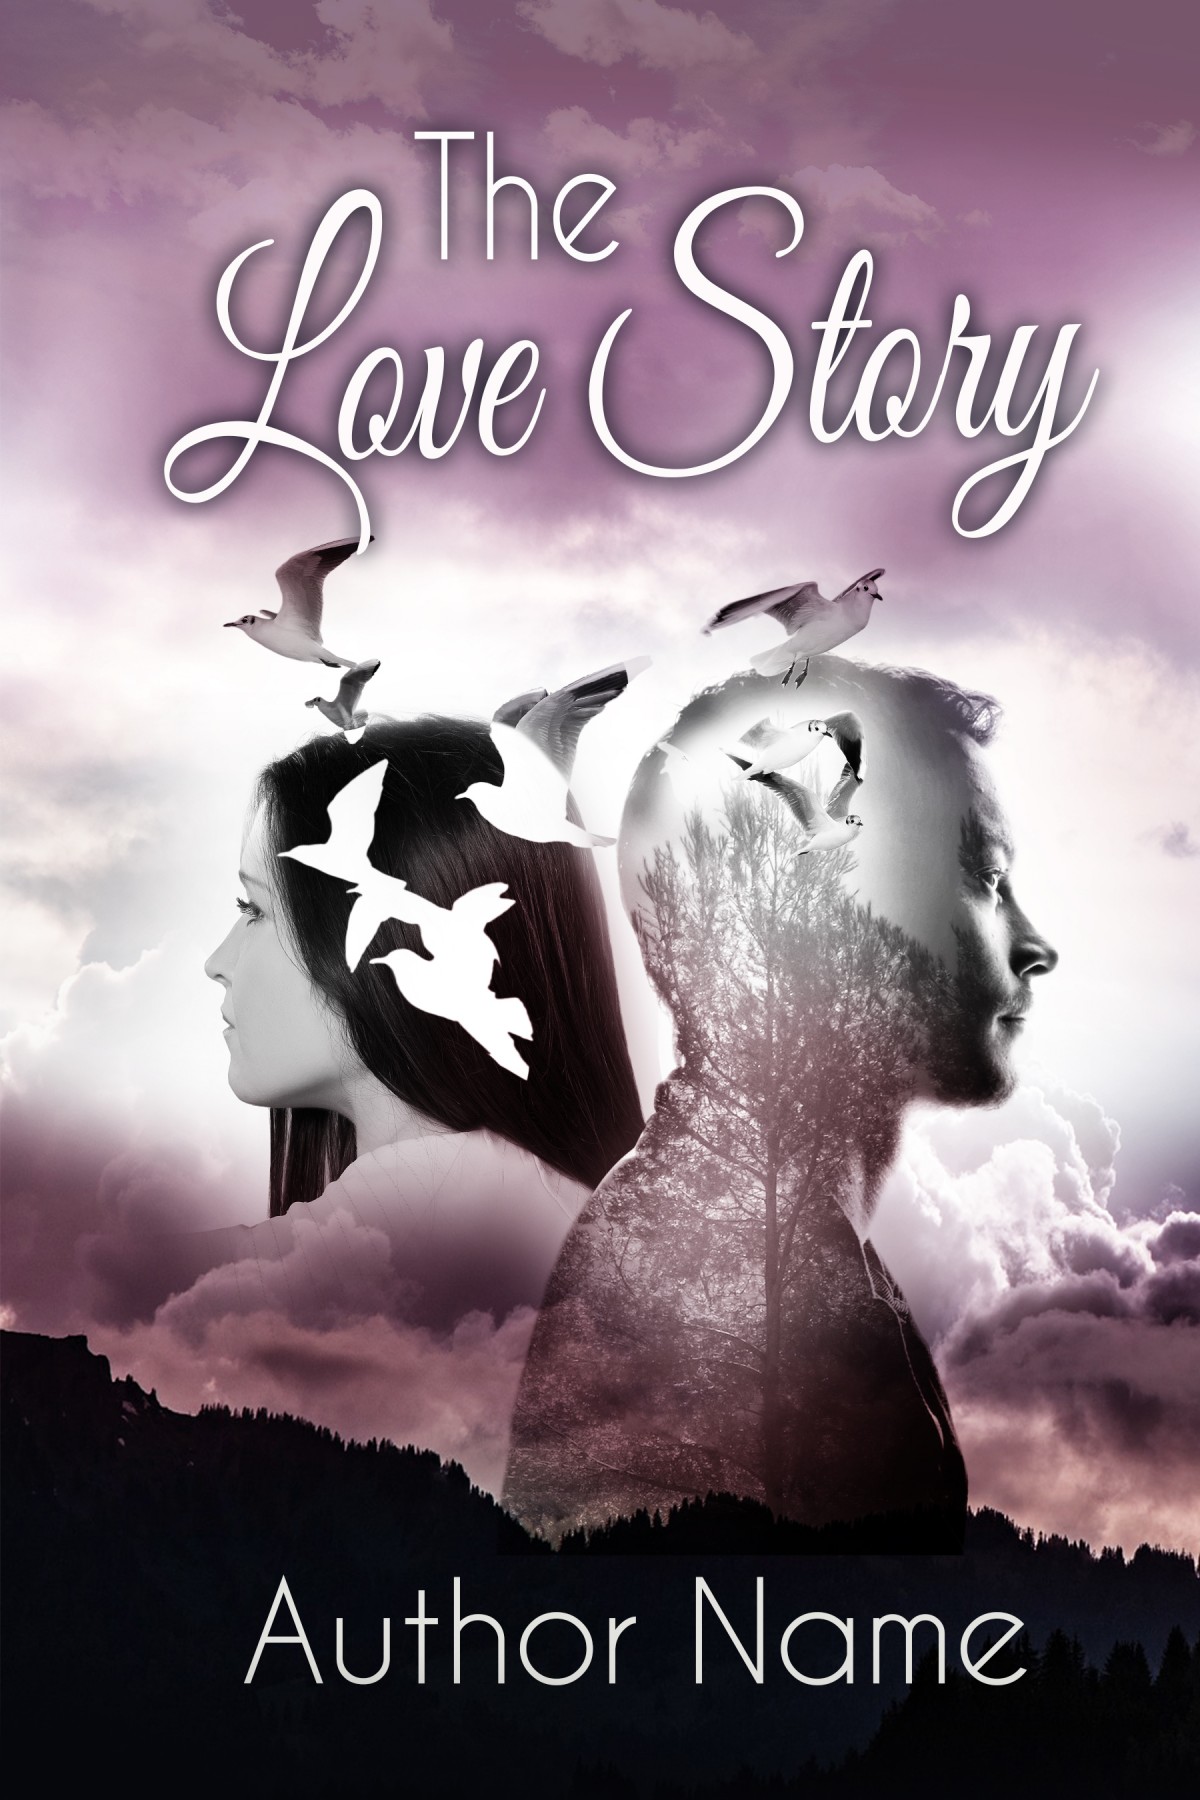 book review of the love story